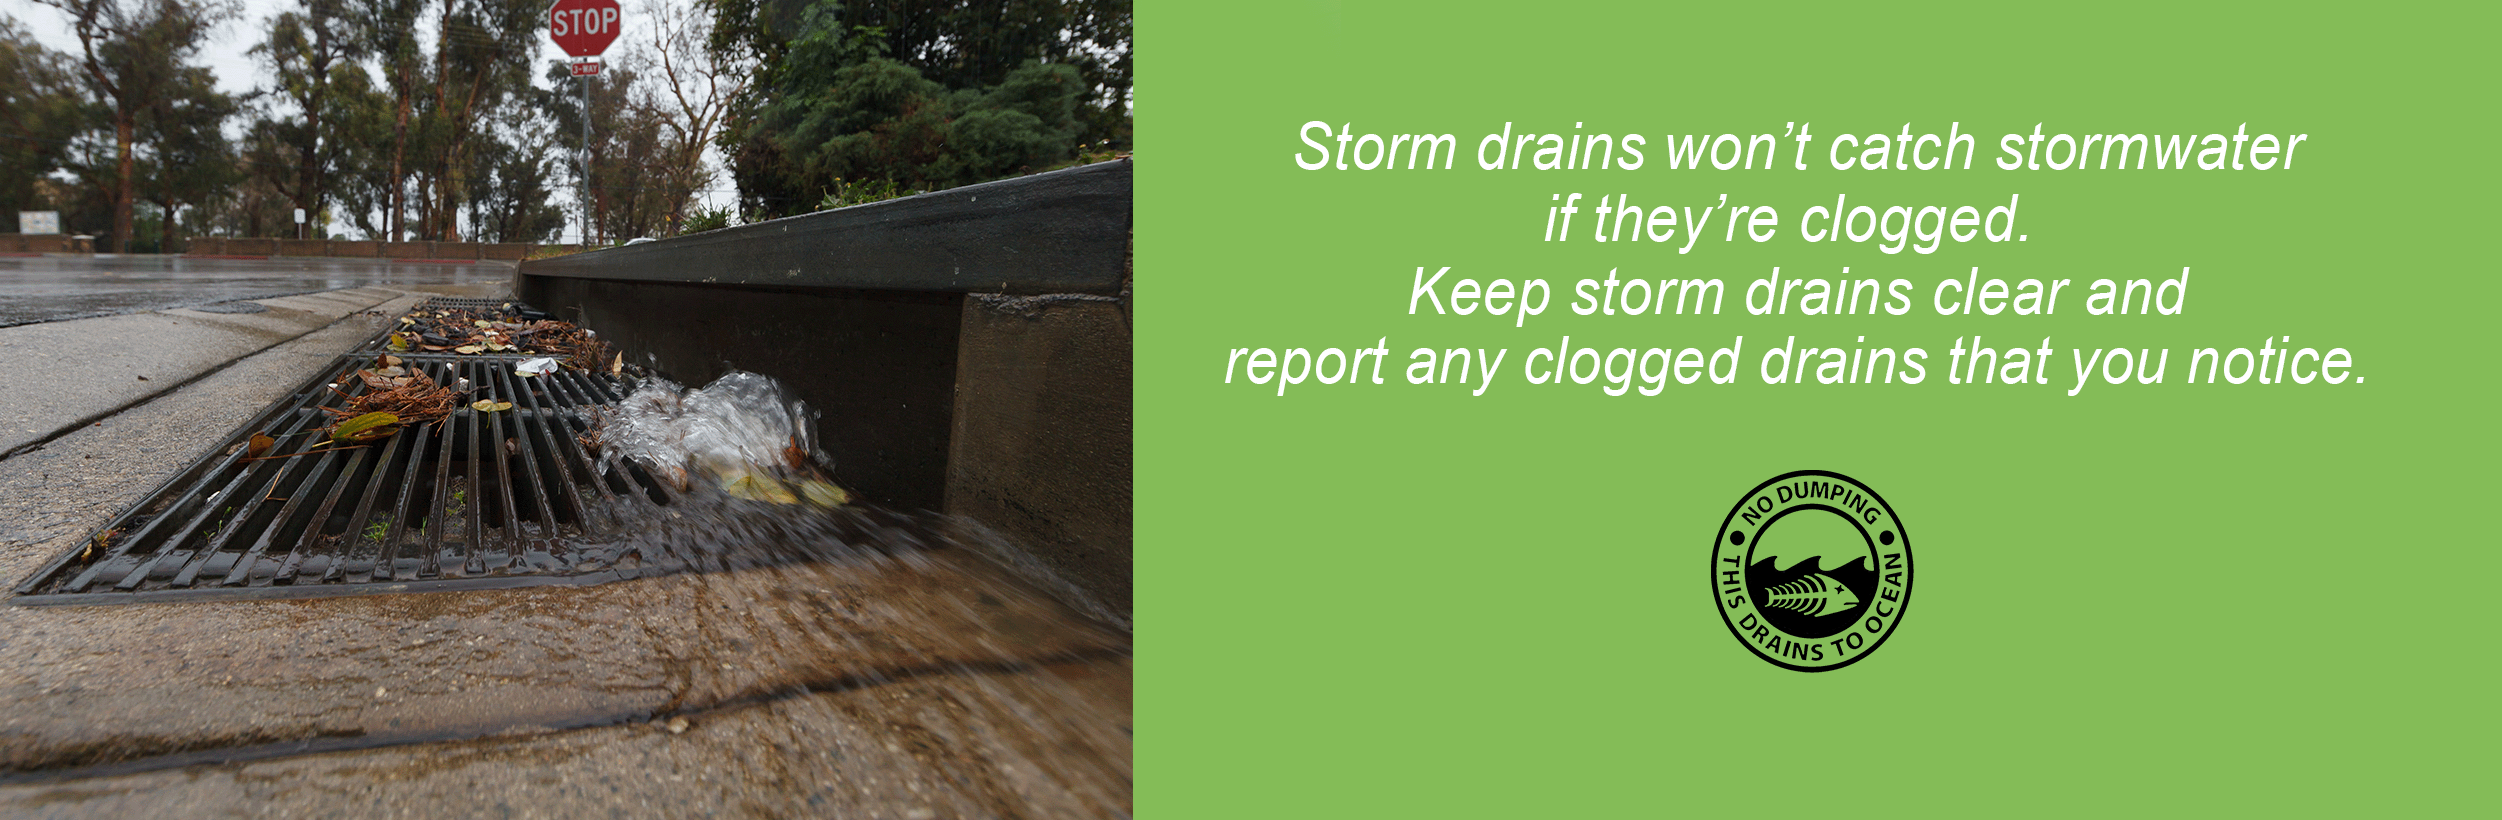 Manage Election Anxiety: Watch Post 10 Unclog Storm Drains